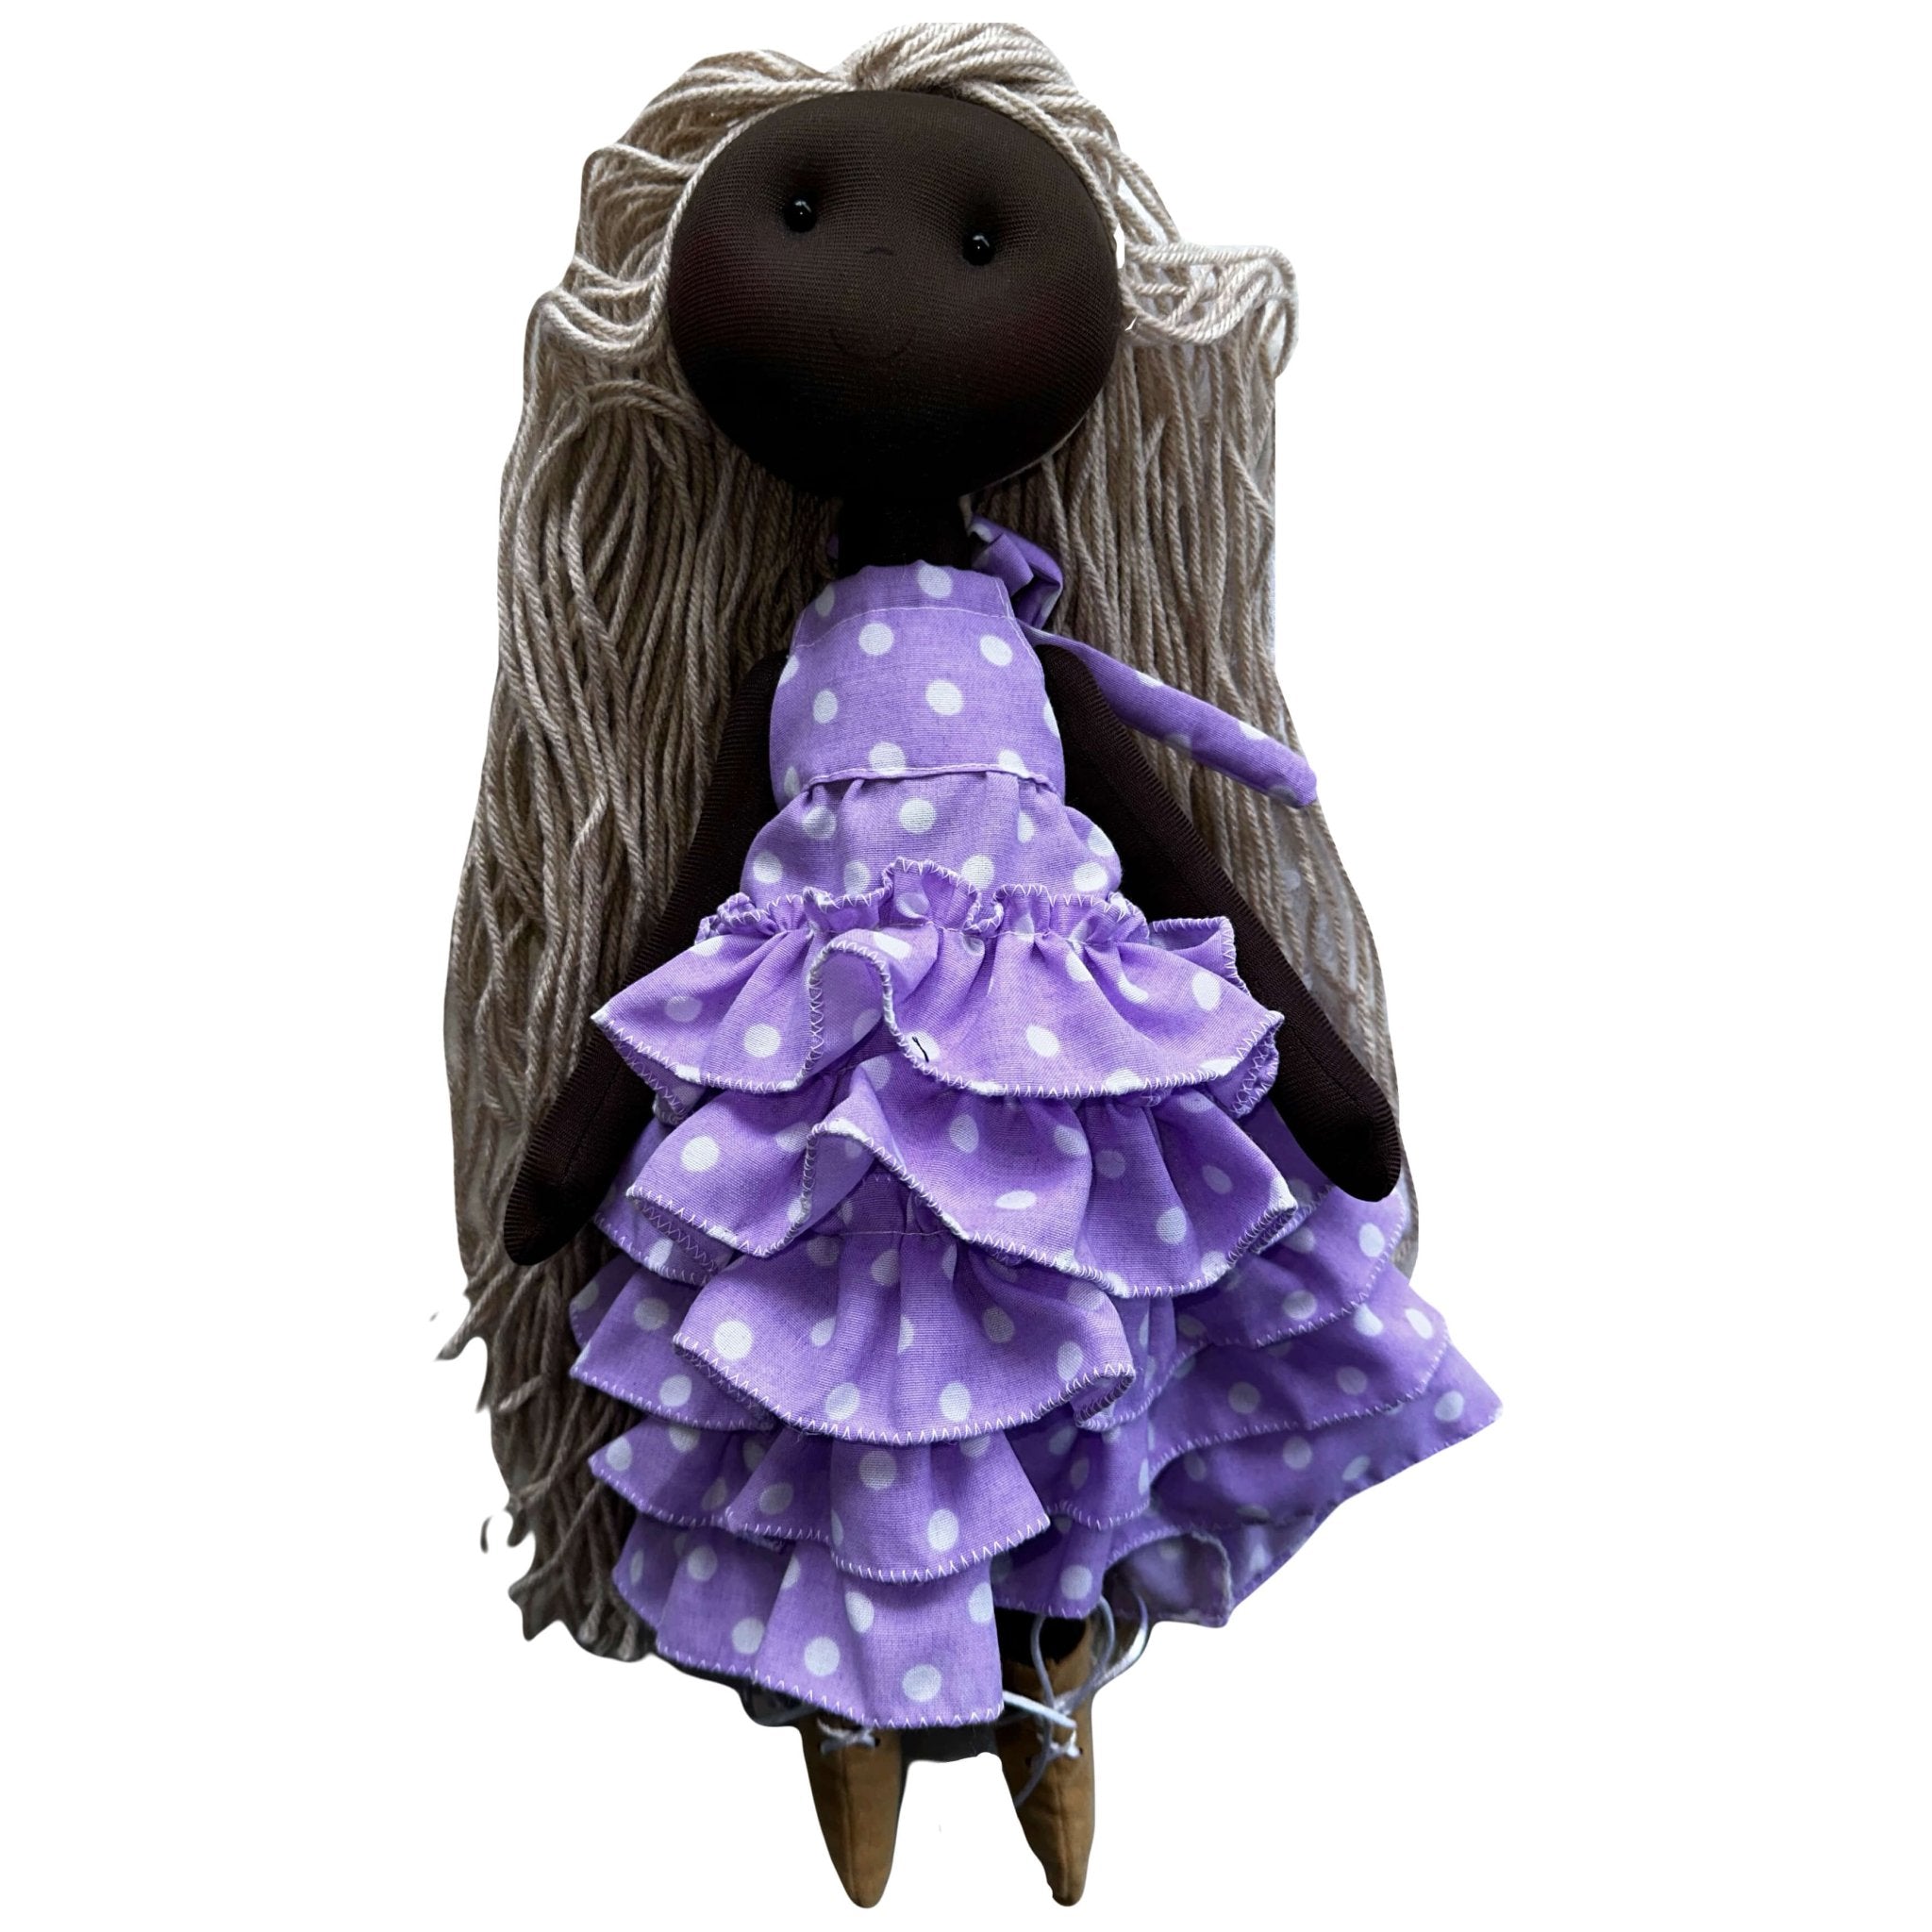 Handmade rag doll from Colombia. She is a ballerina with cute purple polka dot dress with ruffles. She has blonde braids. 